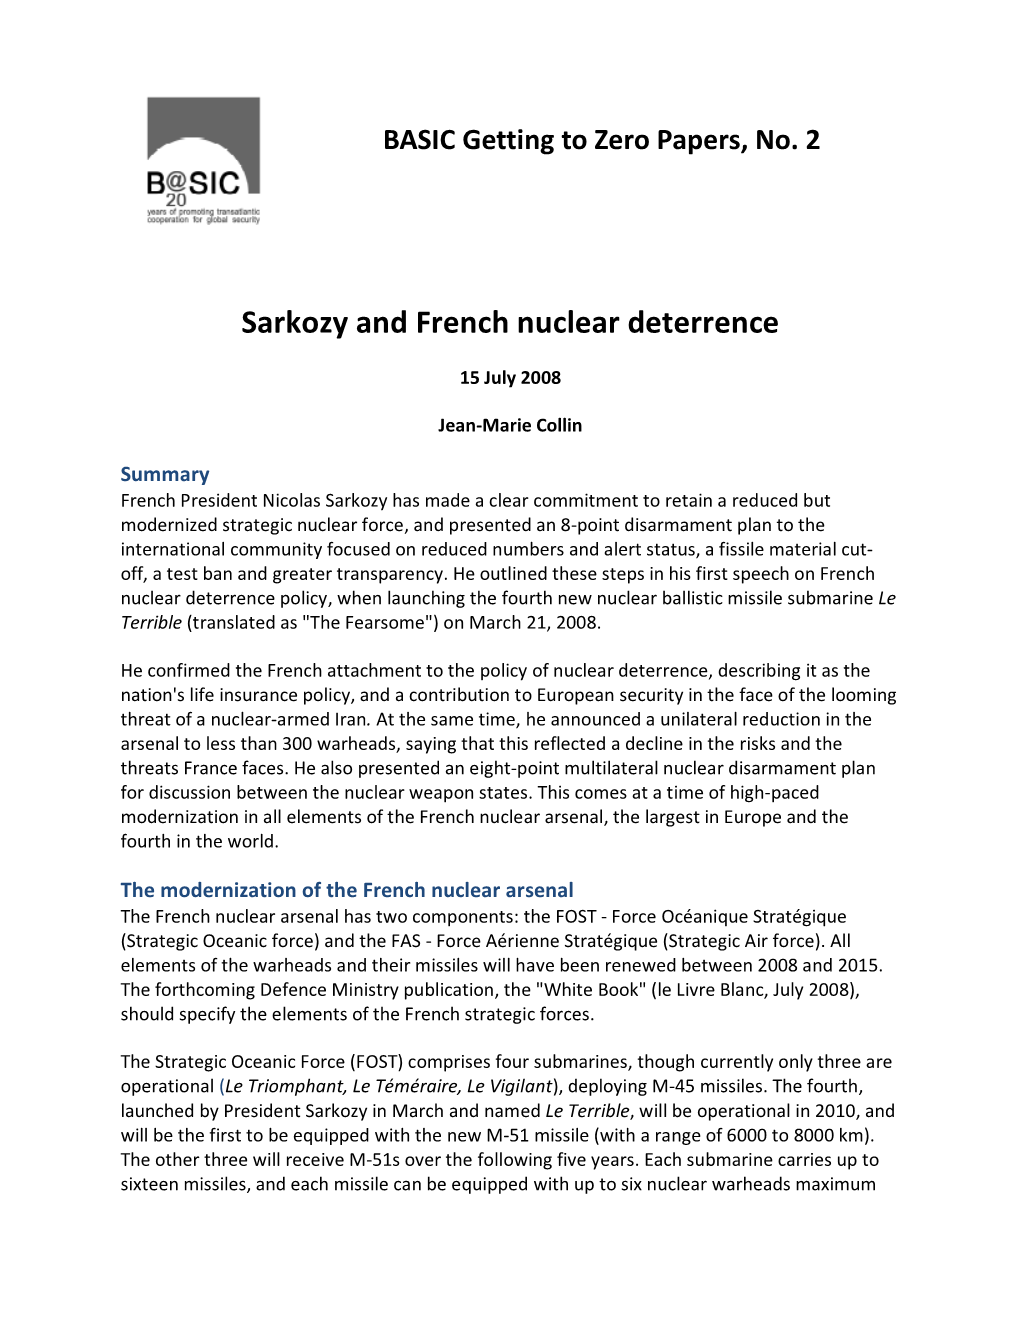 Sarkozy and French Nuclear Deterrence